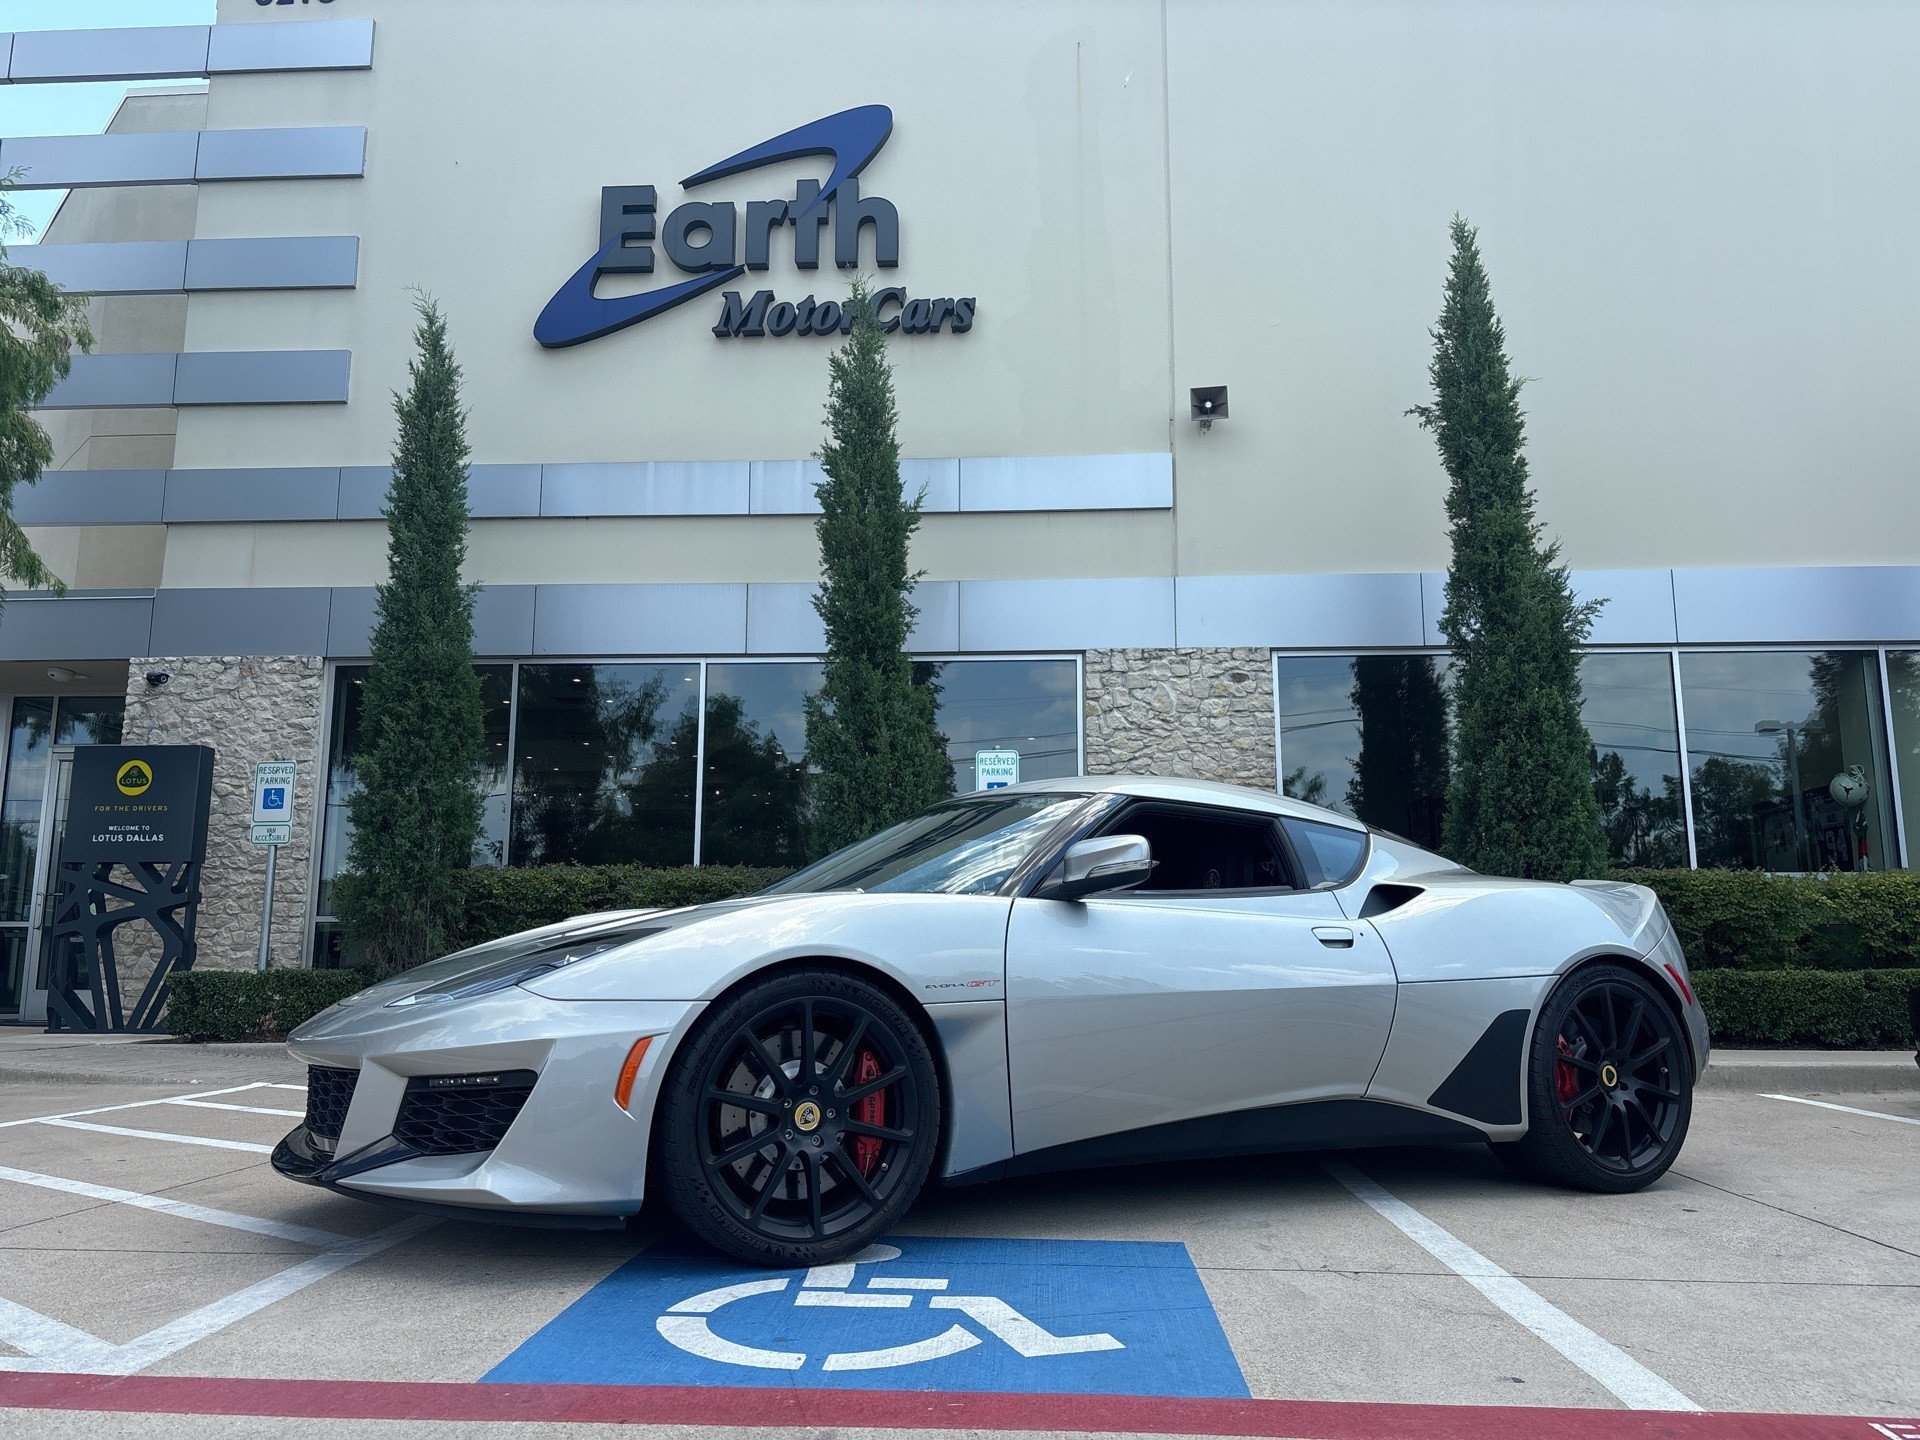 Used 2021 Lotus Evora GT Base with VIN SCCLMDDN0MHA20272 for sale in Carrollton, TX